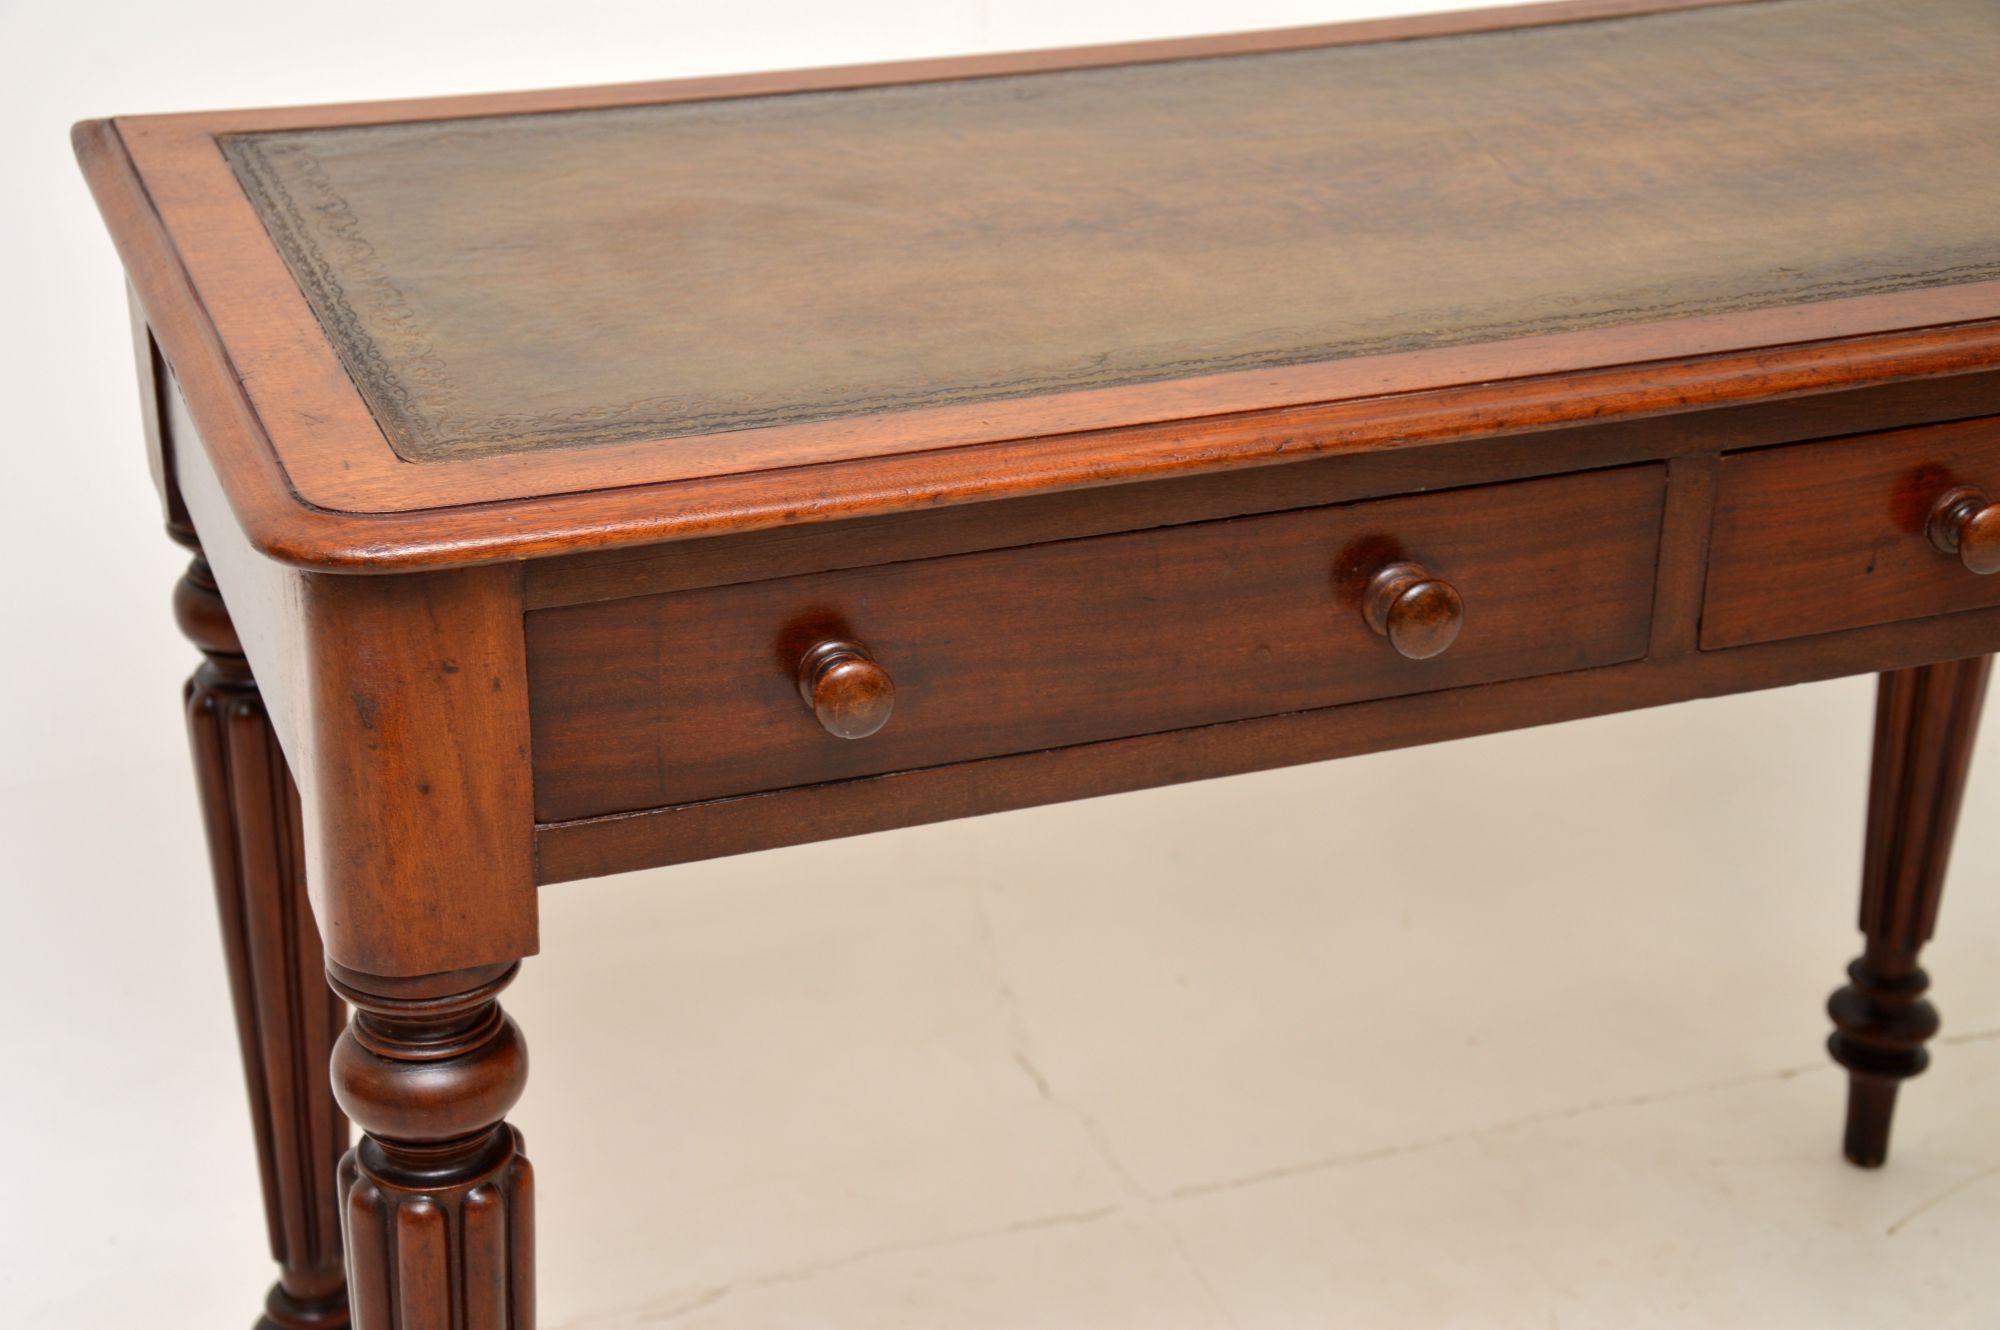 Leather Antique Victorian Writing Table / Desk